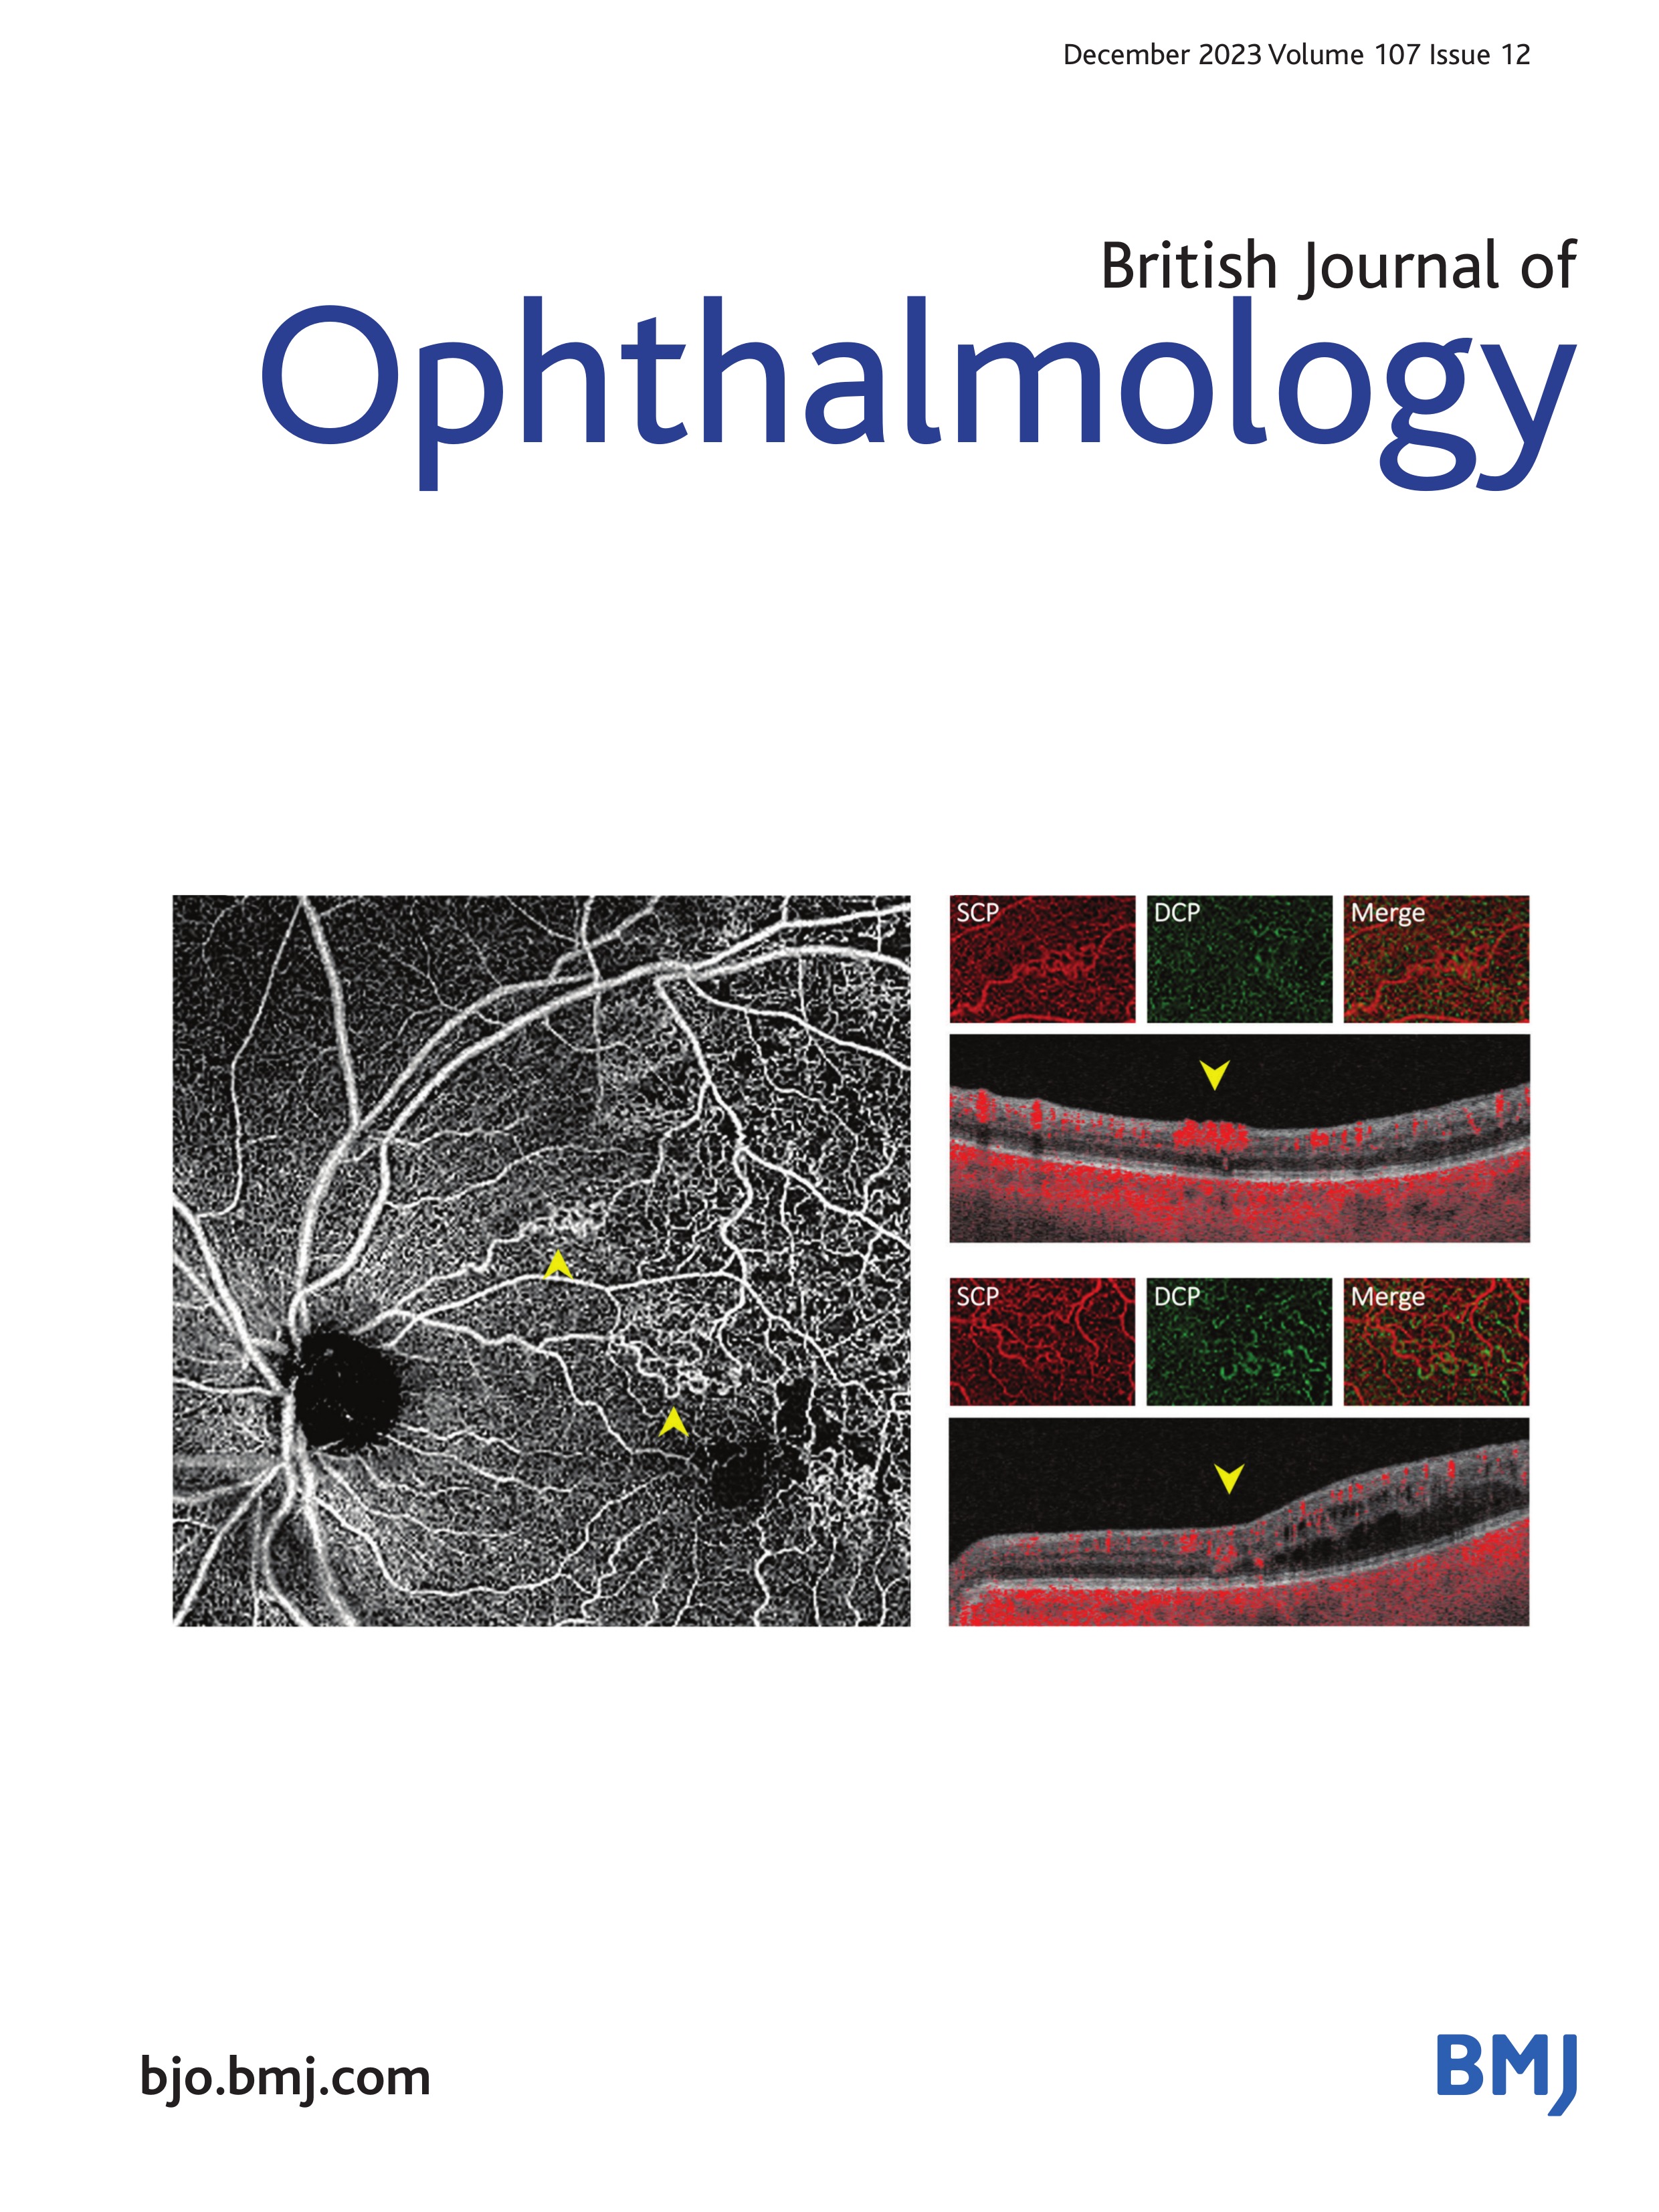 Automated segmentation of ultra-widefield fluorescein angiography of diabetic retinopathy using deep learning